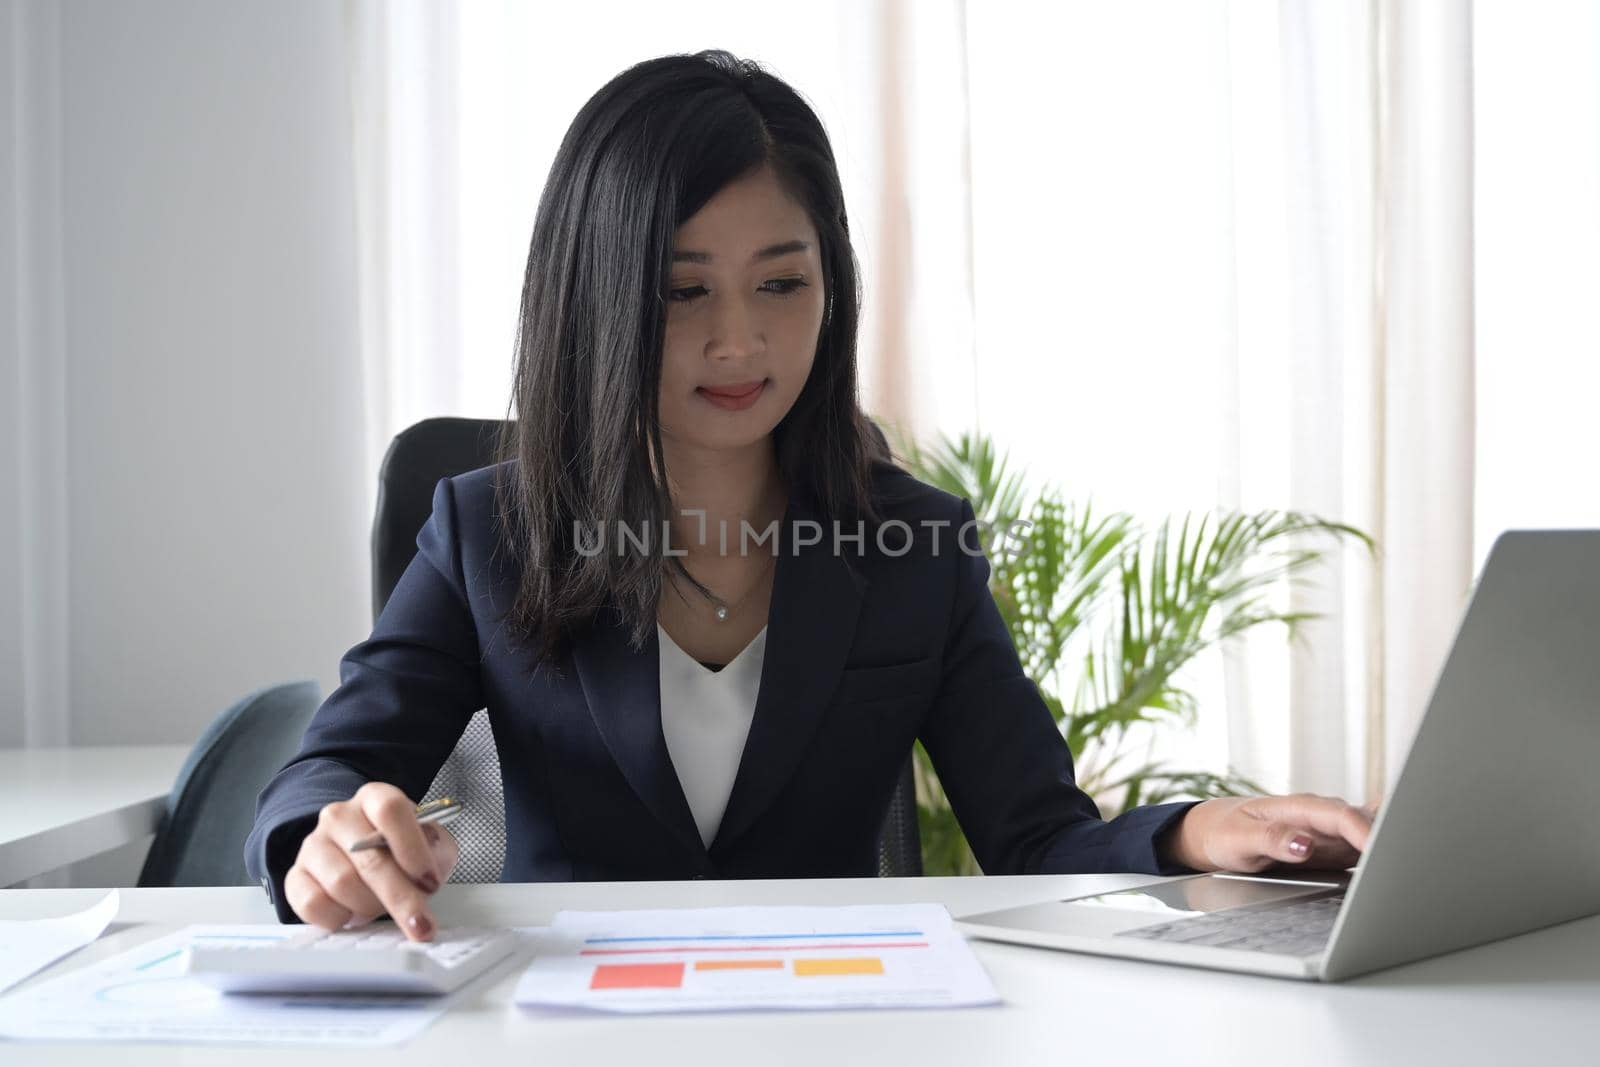 Asian business woman using calculator and working with laptop at office desk.